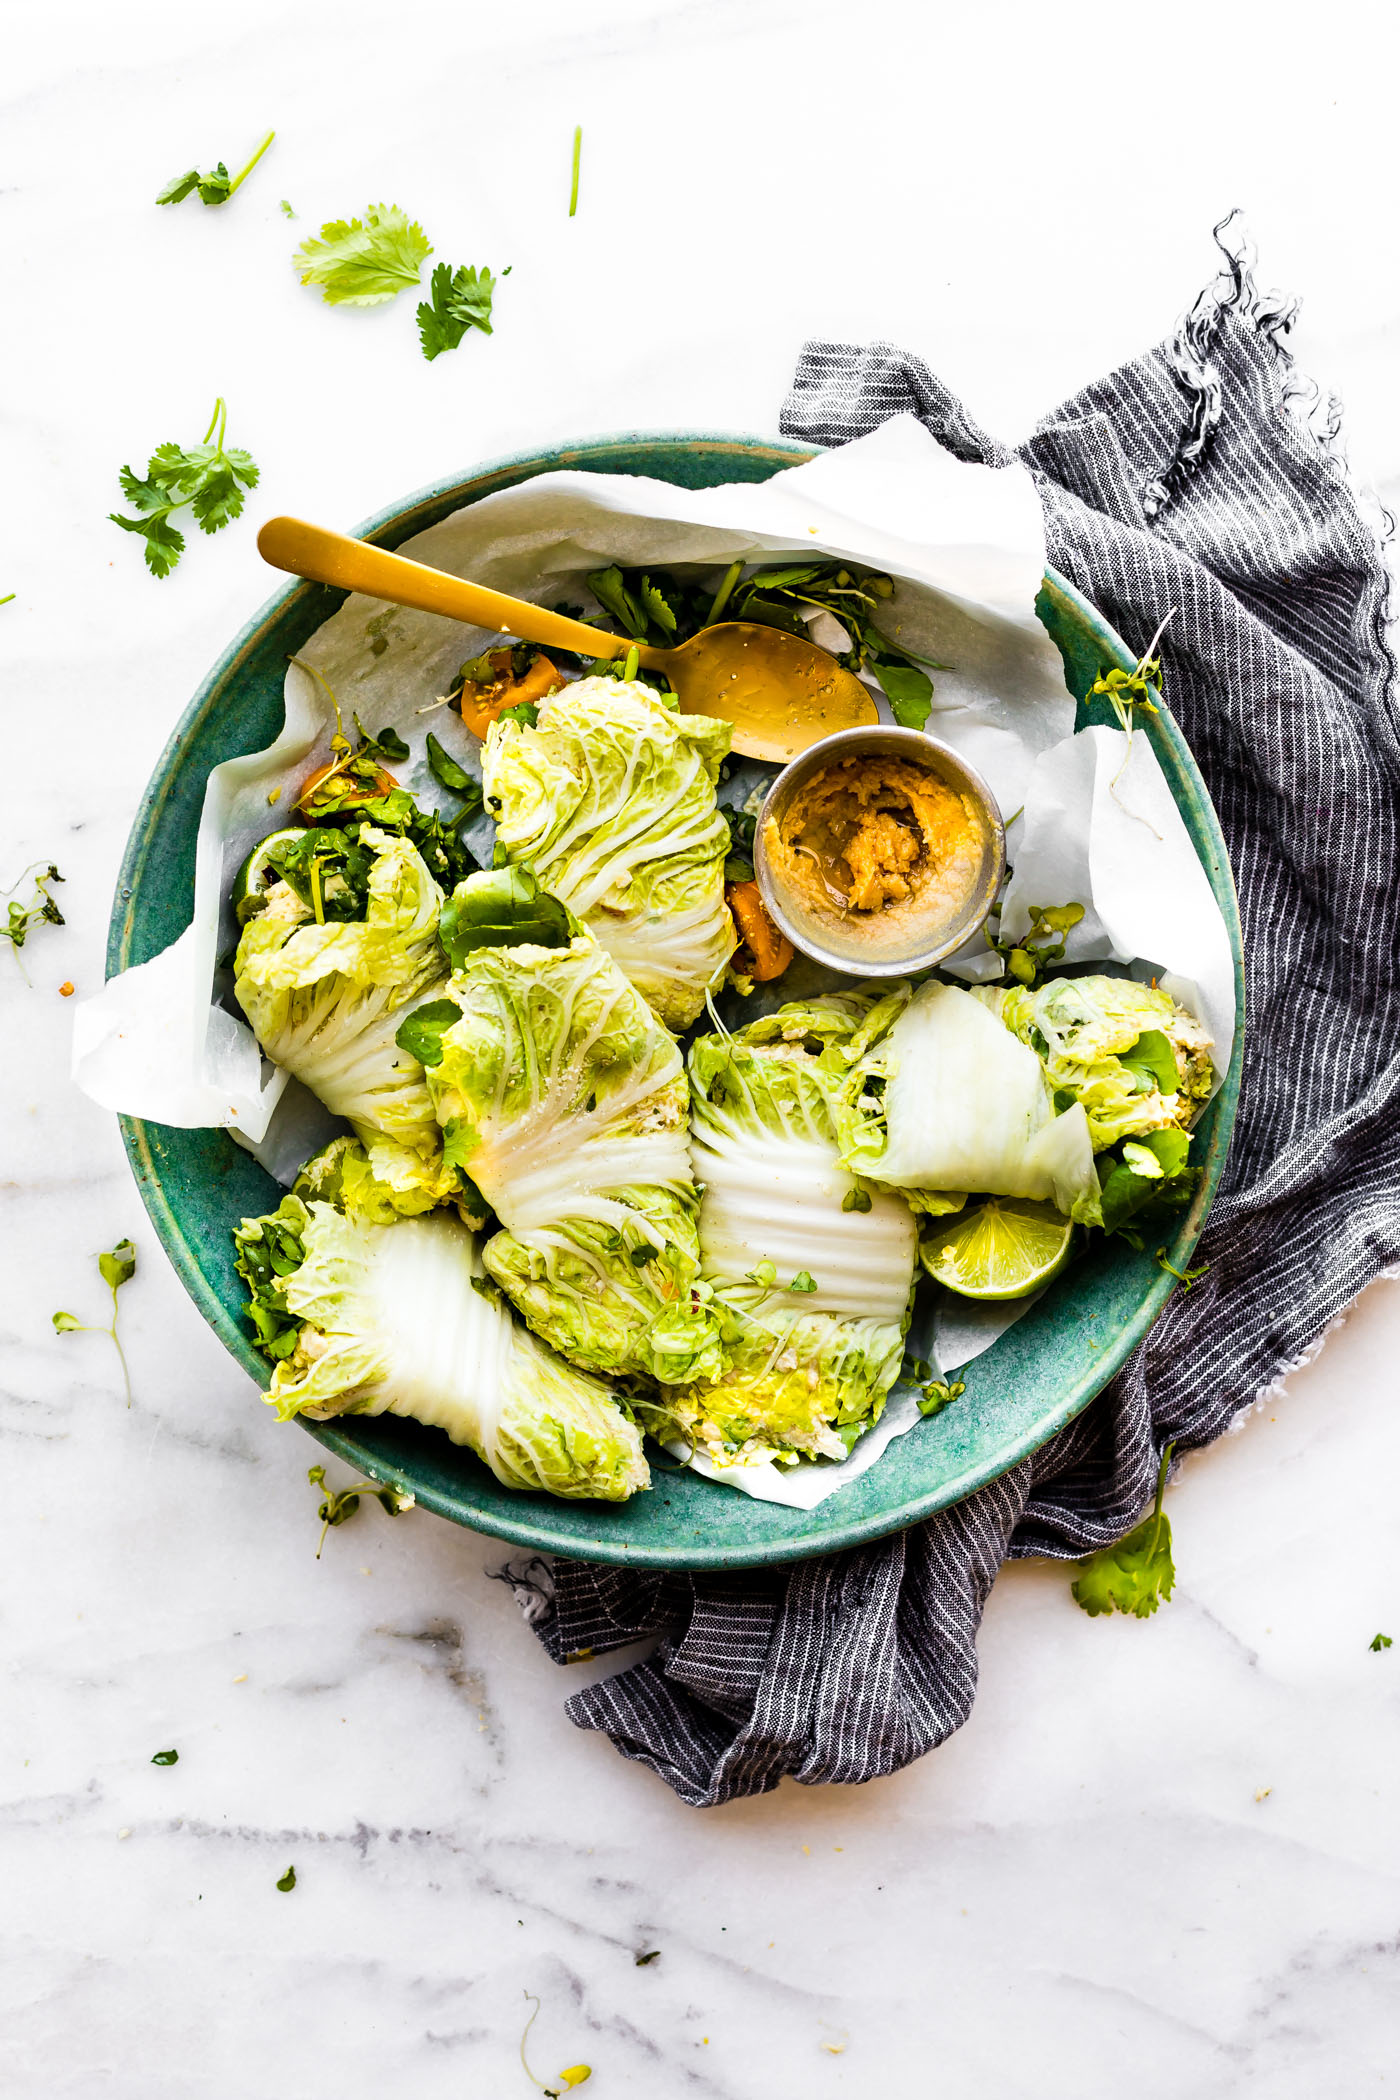 Miso Mango Chicken Salad Cabbage wraps are the perfect light low carb lunch that's easy to make! A mango chicken salad that's mayo free, paleo friendly, and flavorful! Spread the miso mango chicken salad mixture over napa cabbage, add a little bit of watercress, then firmly roll up! Bam, a perfectly handy lunch or light dinner!